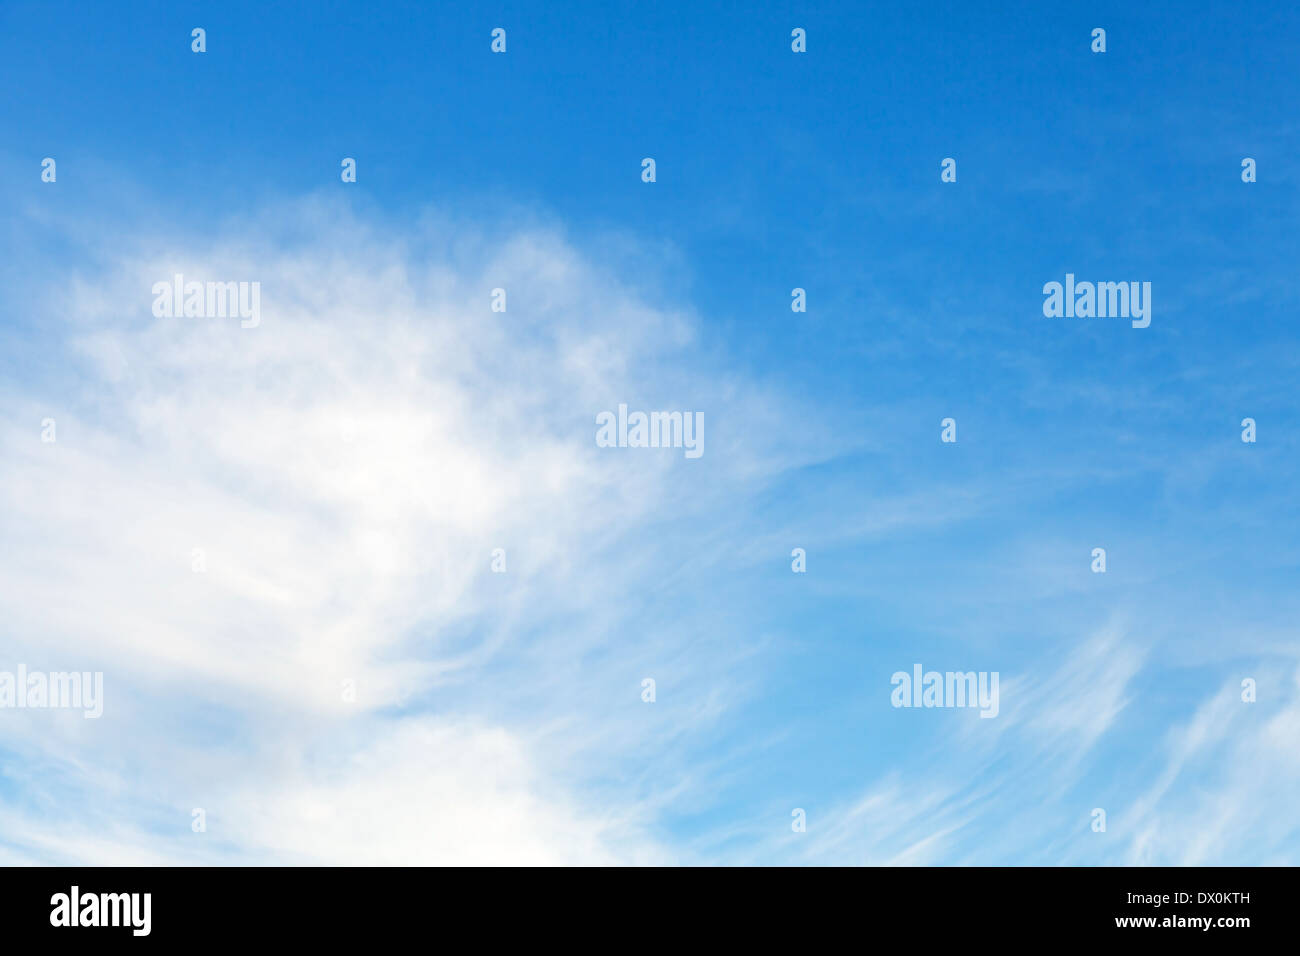 Natural blue cloudy sky background texture Stock Photo